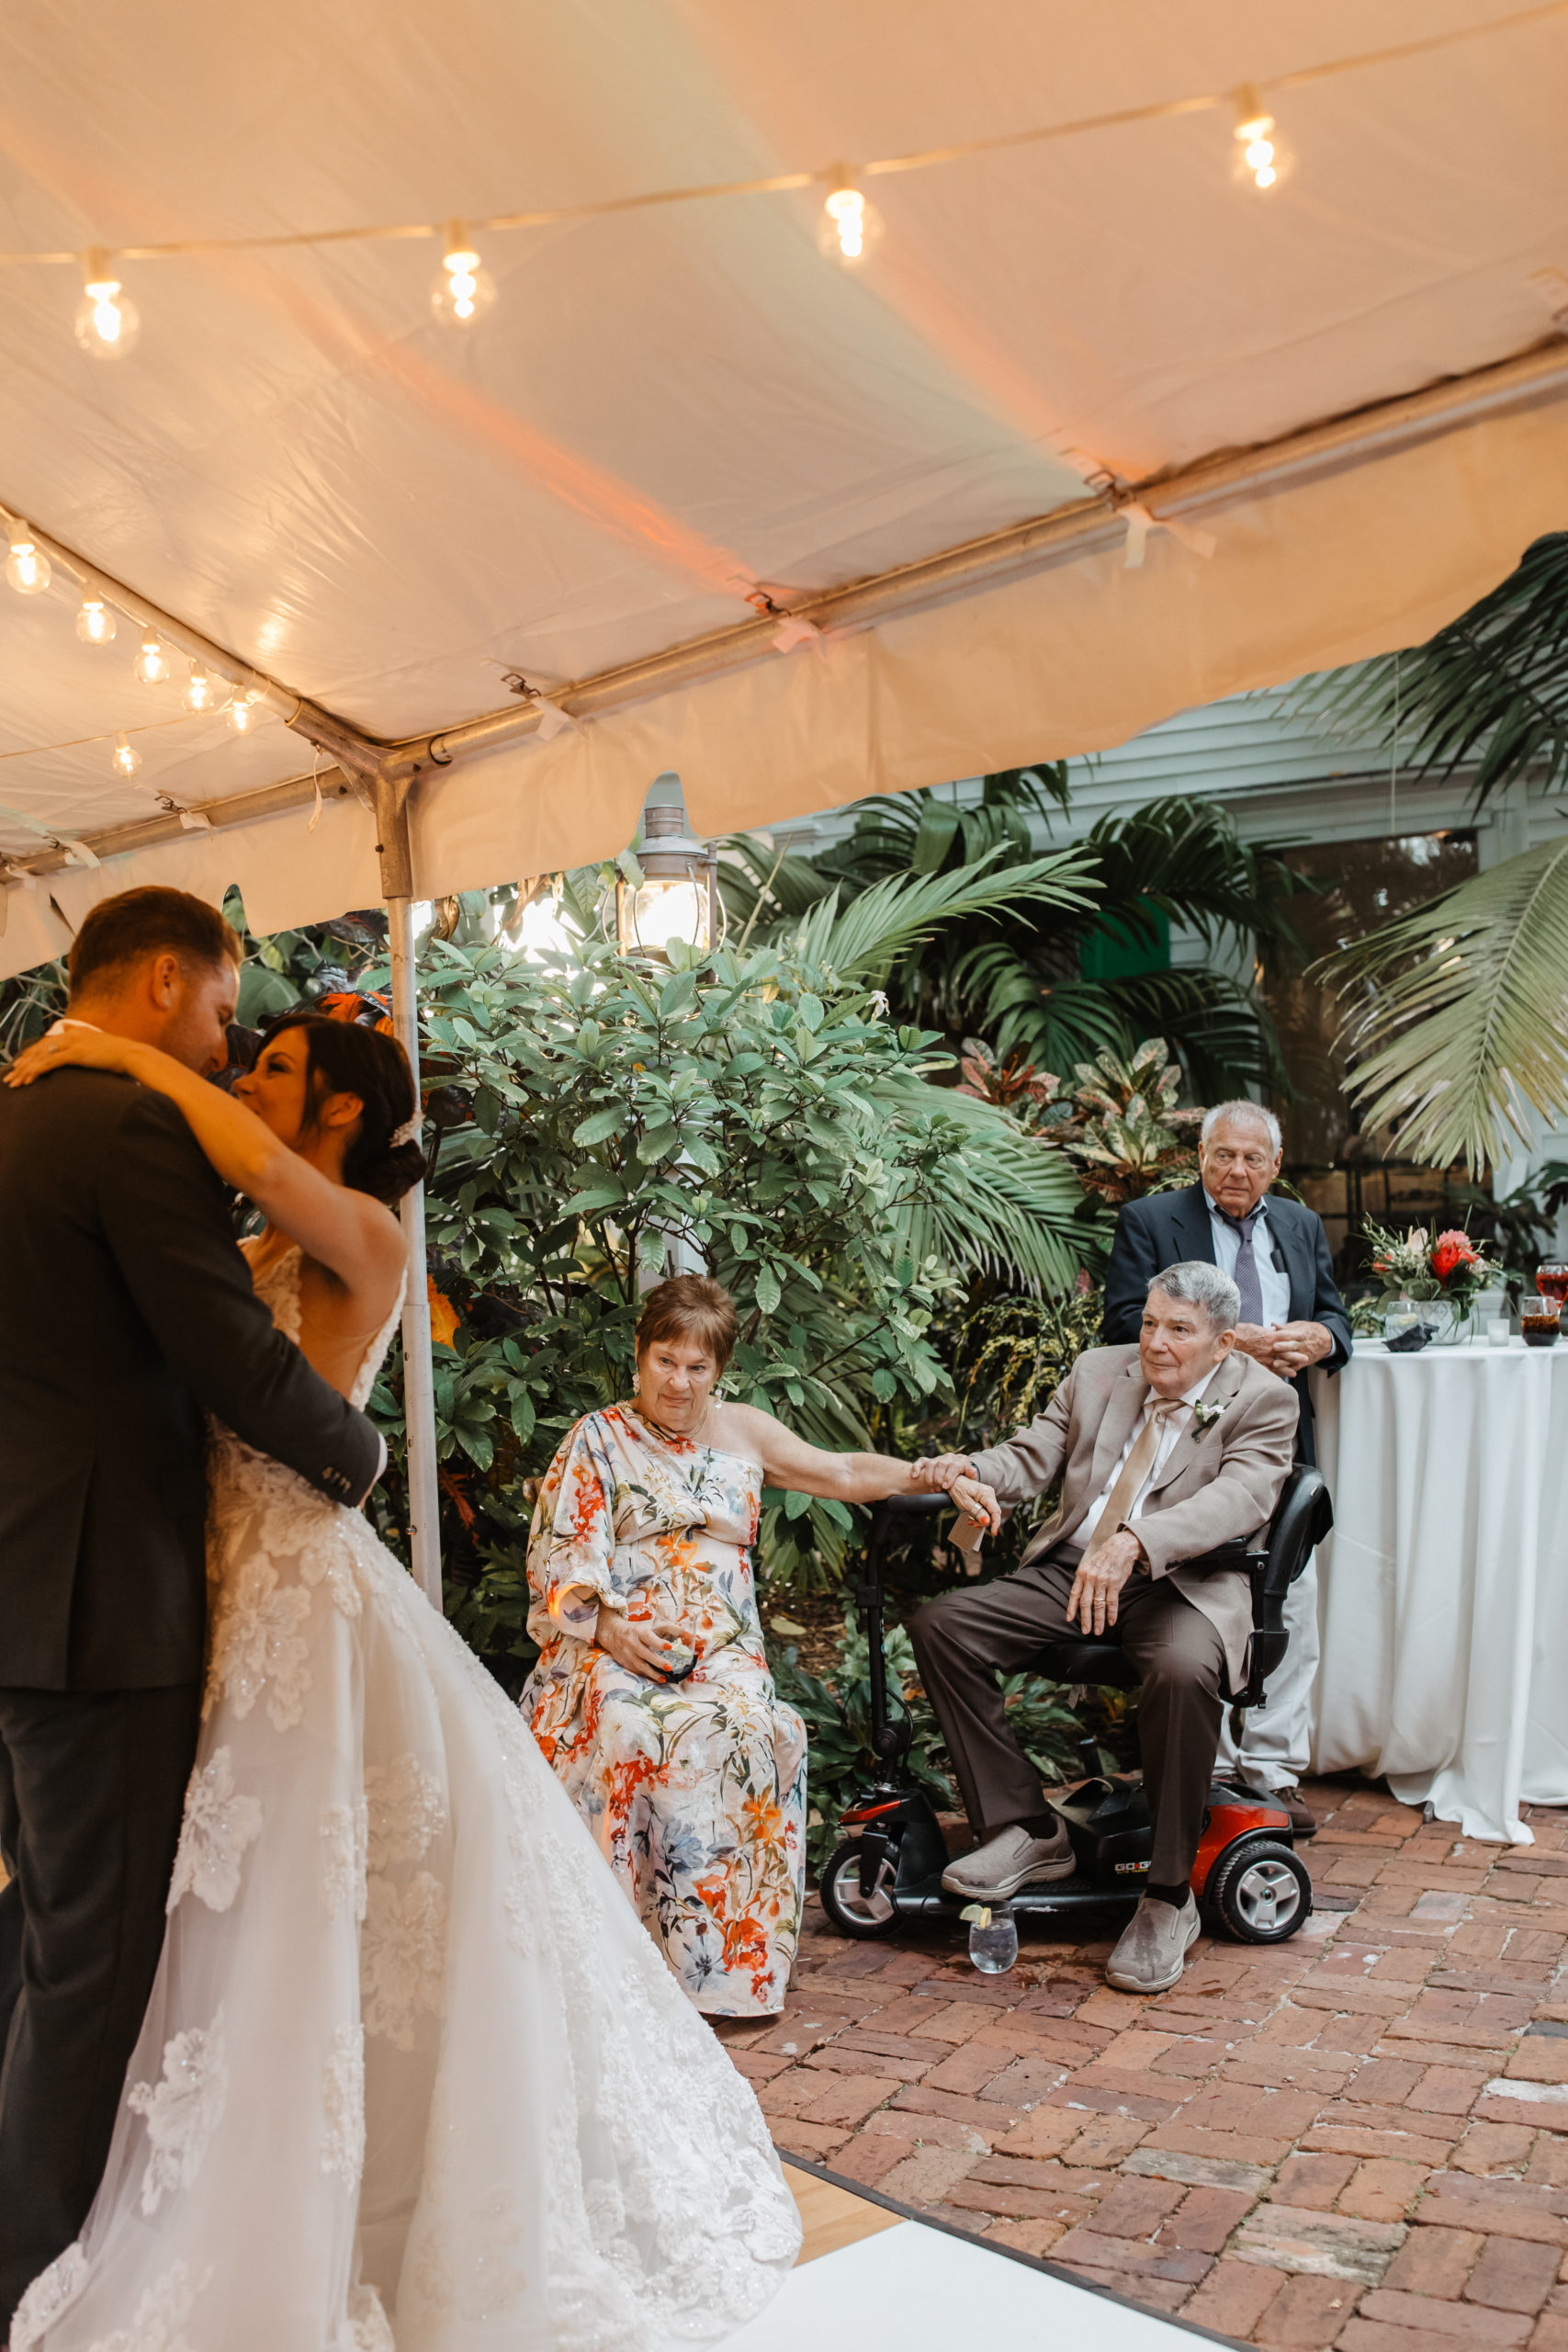 the mom and dad of the bride watch the first dance at the Florida wedding